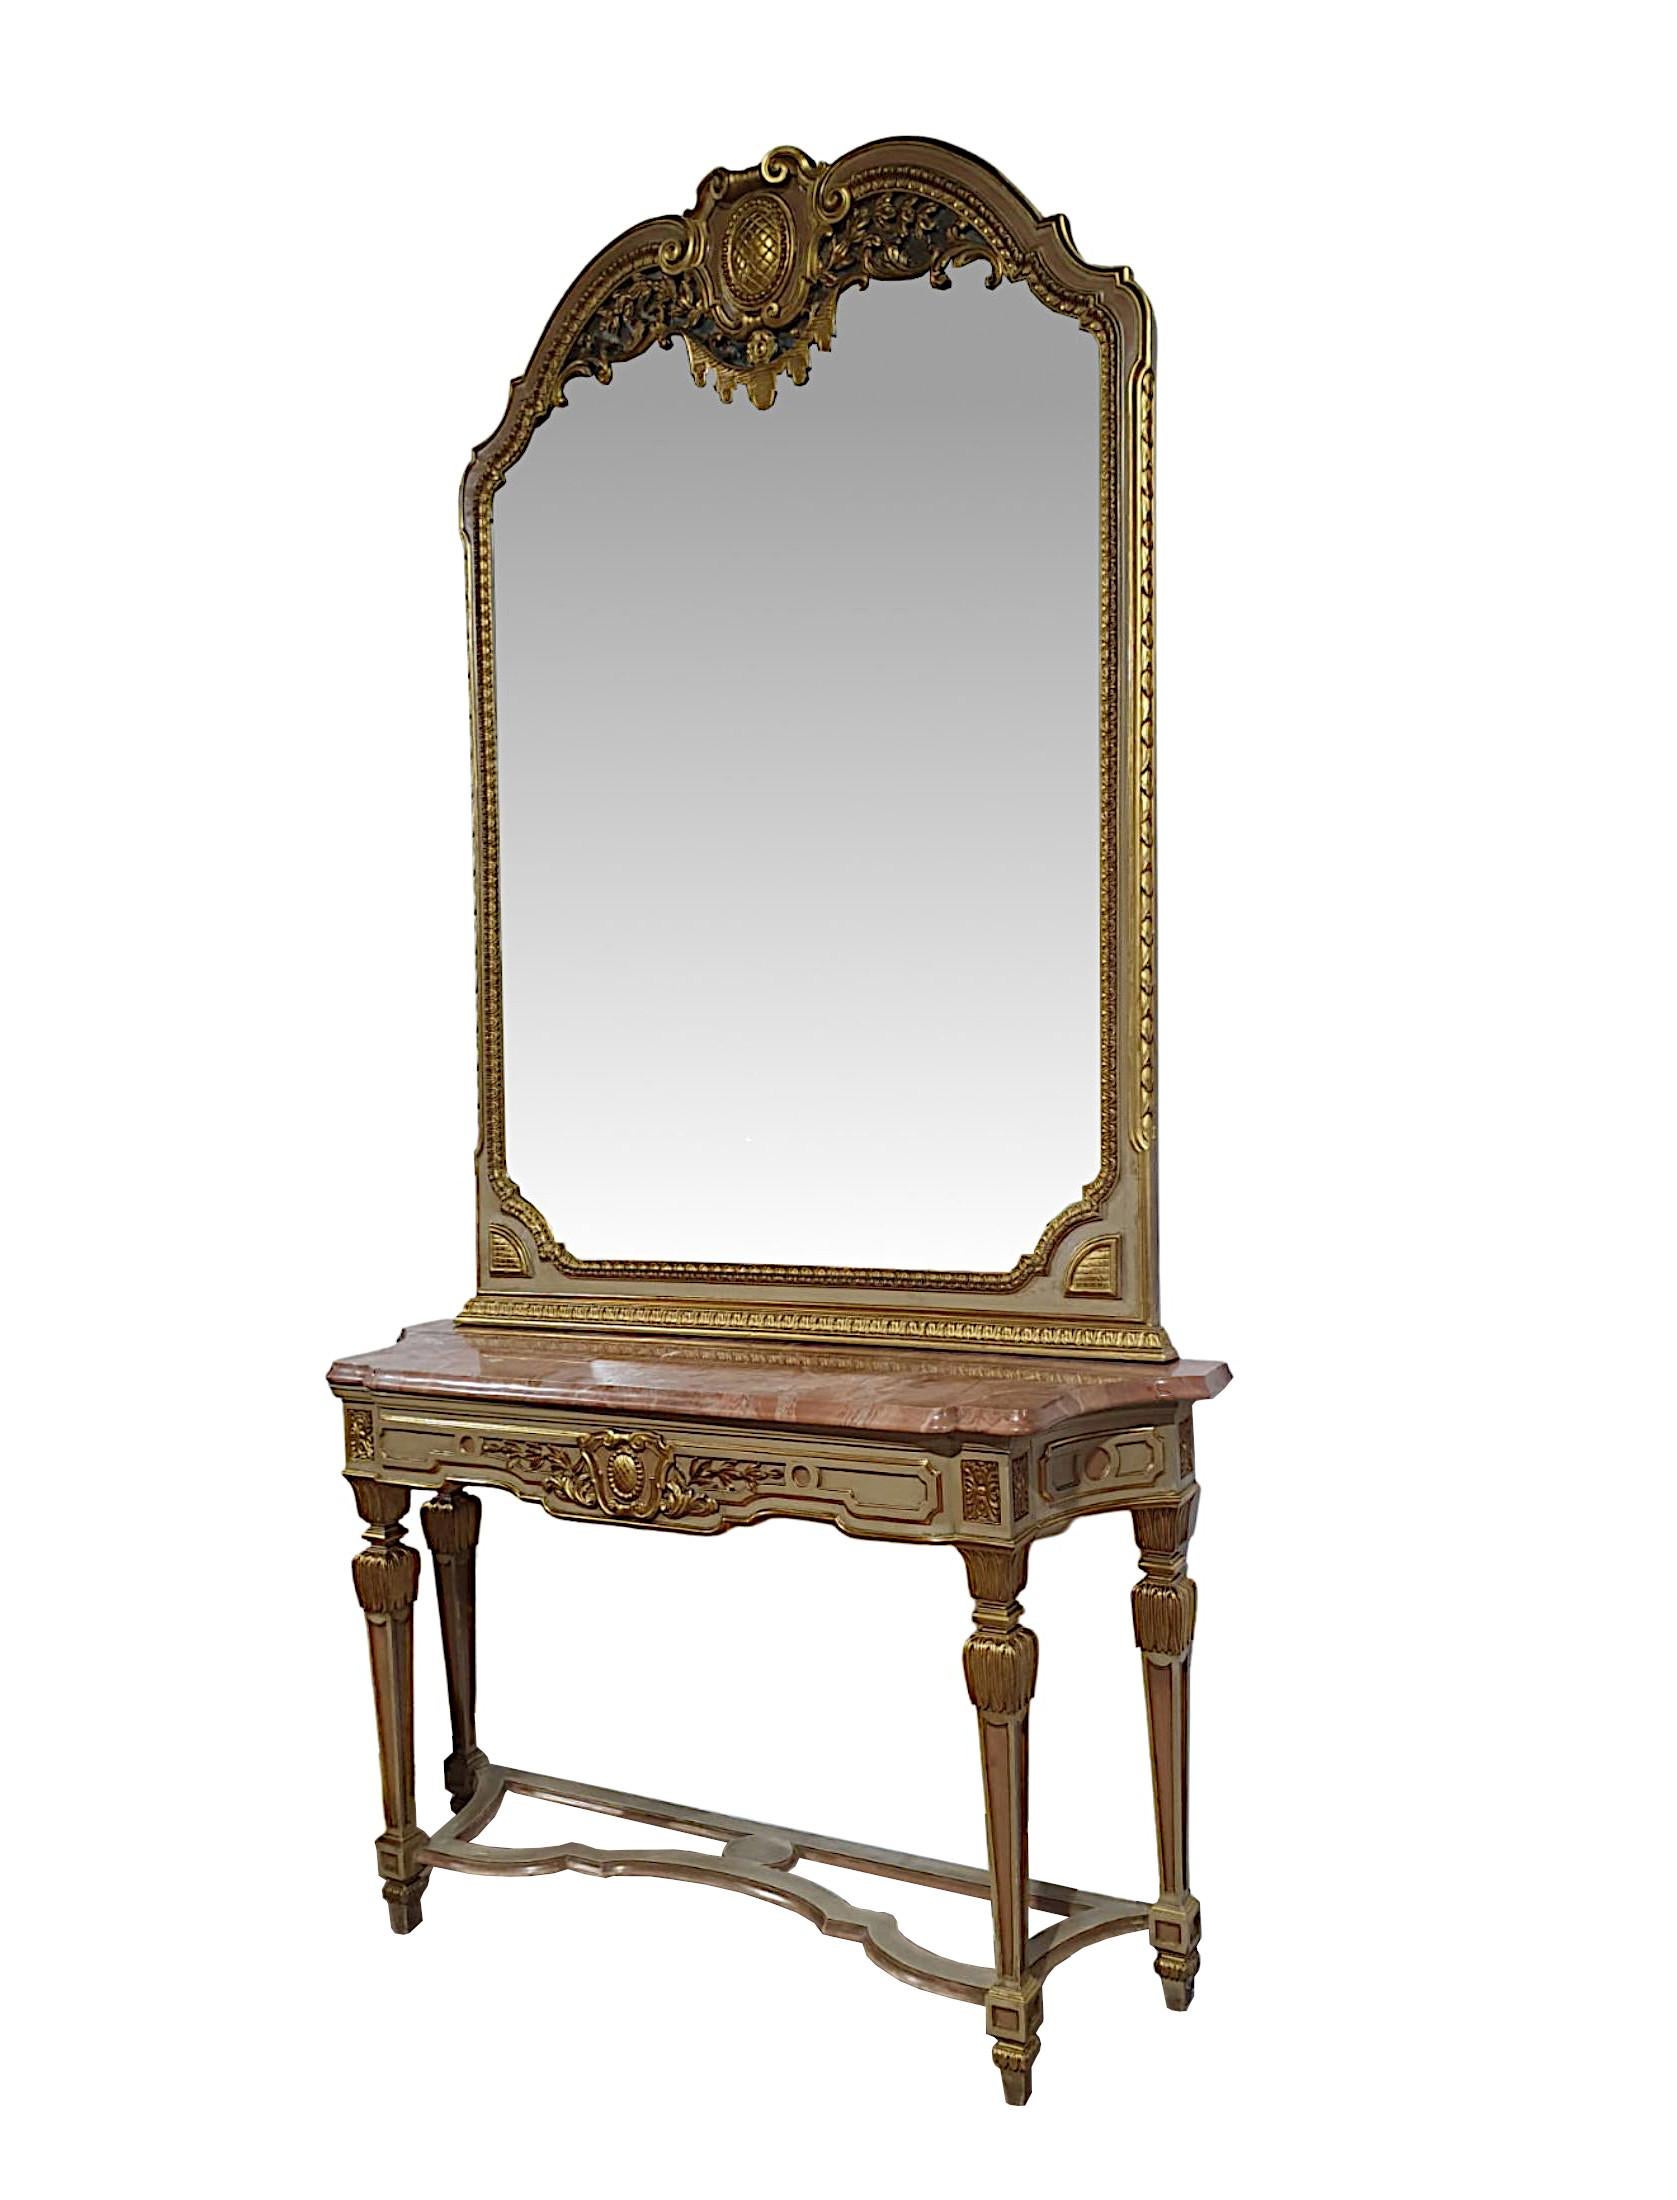 A very fine early 20th century French parcel gilt marble top console table and matching giltwood mirror of exceptional quality. The original sectioned mirror glass plate of arch top form is set within a stunningly hand carved, moulded and pierced